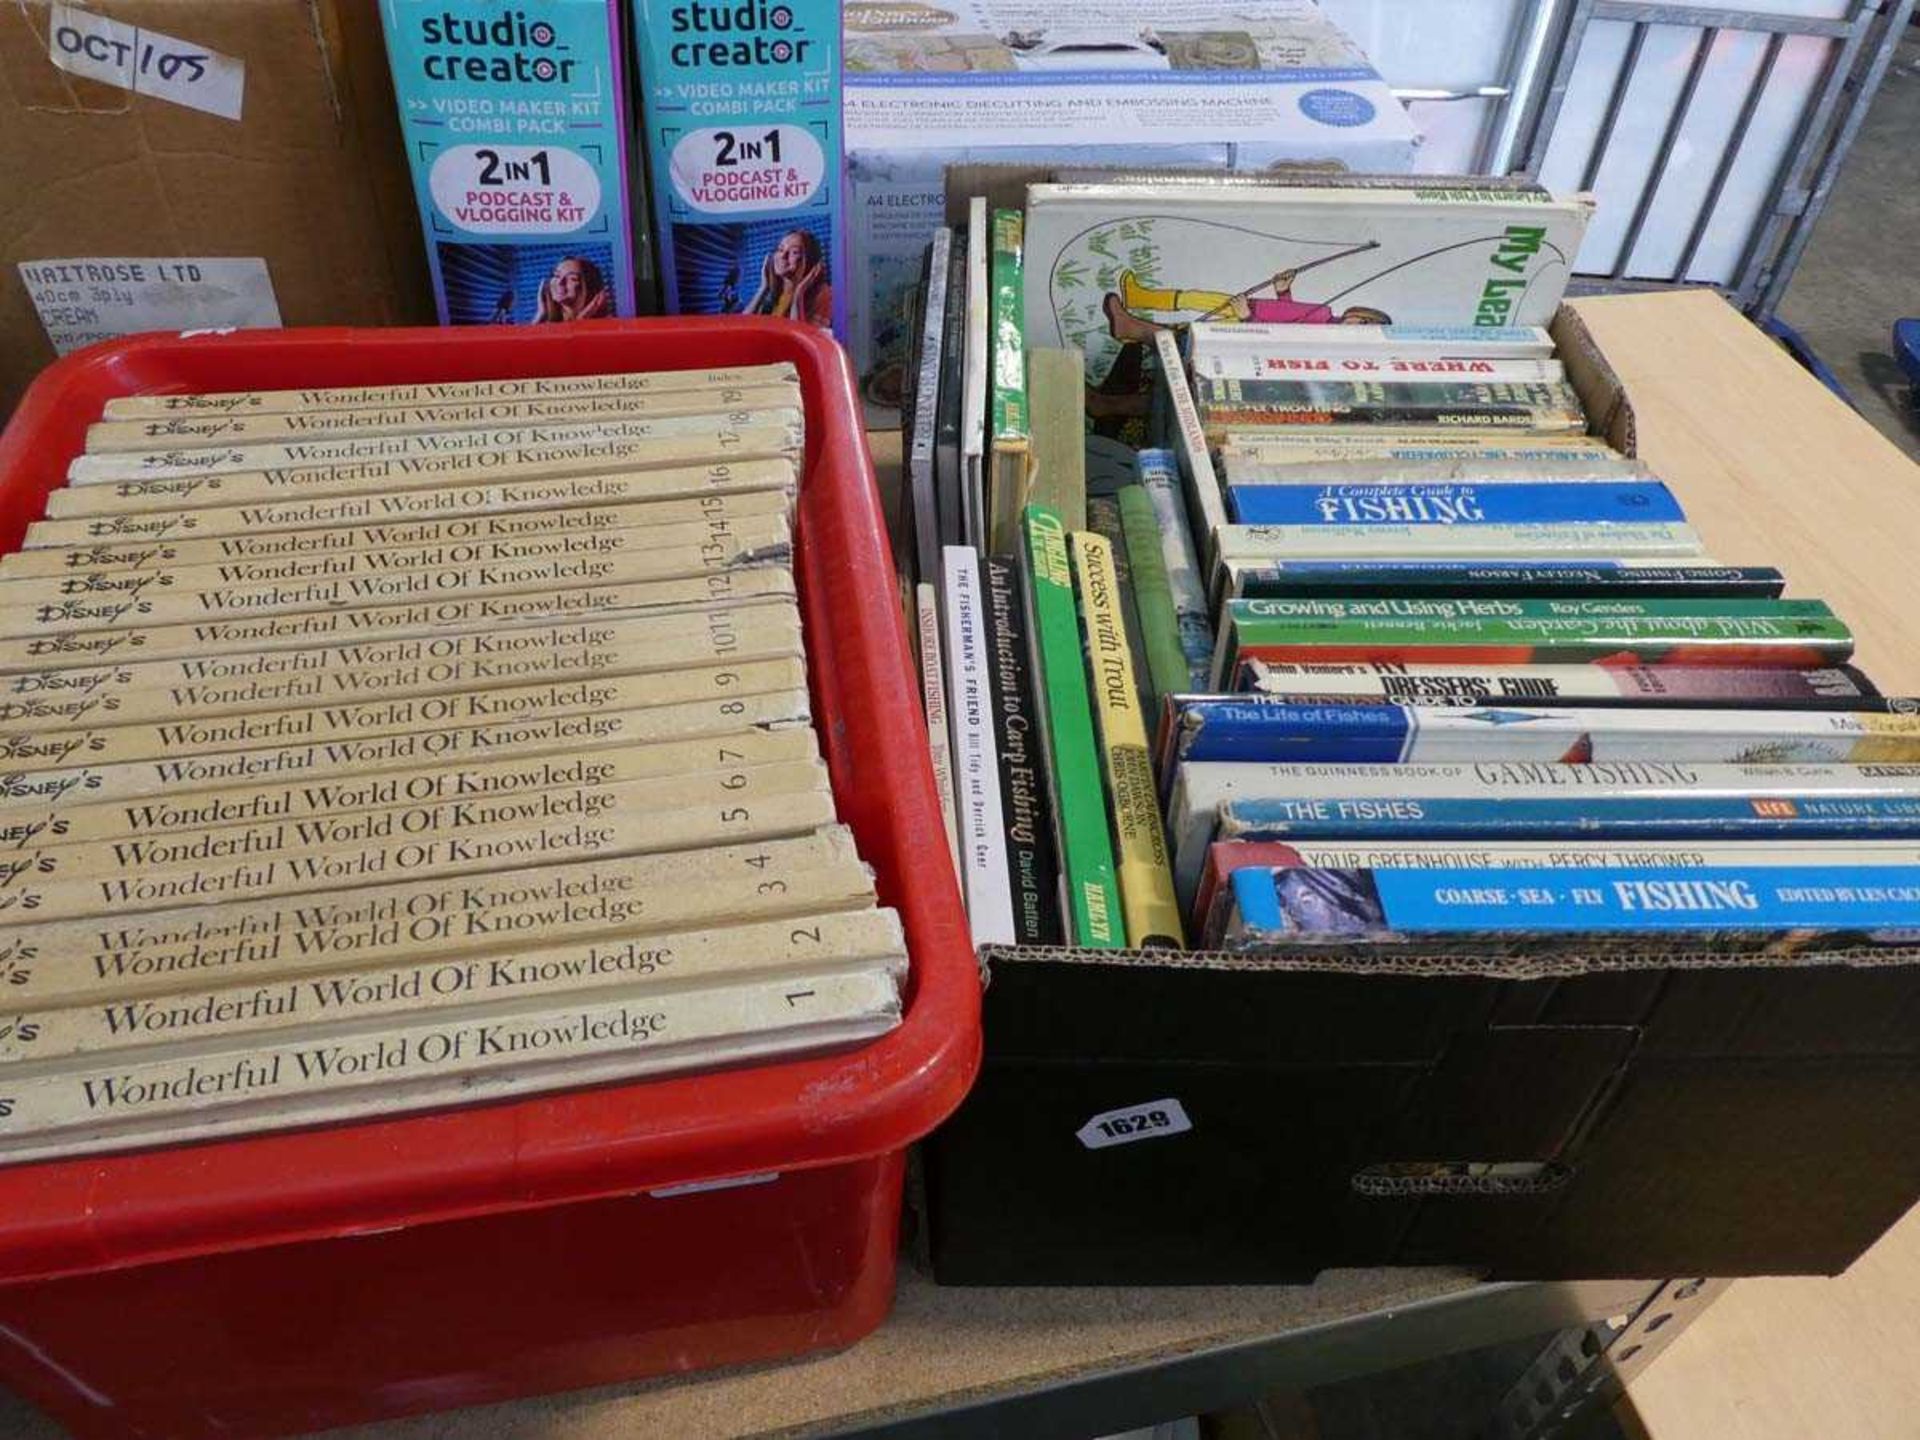 Plastic crate containing Disney's Wonderful World of Knowledge books and another tray of fishing